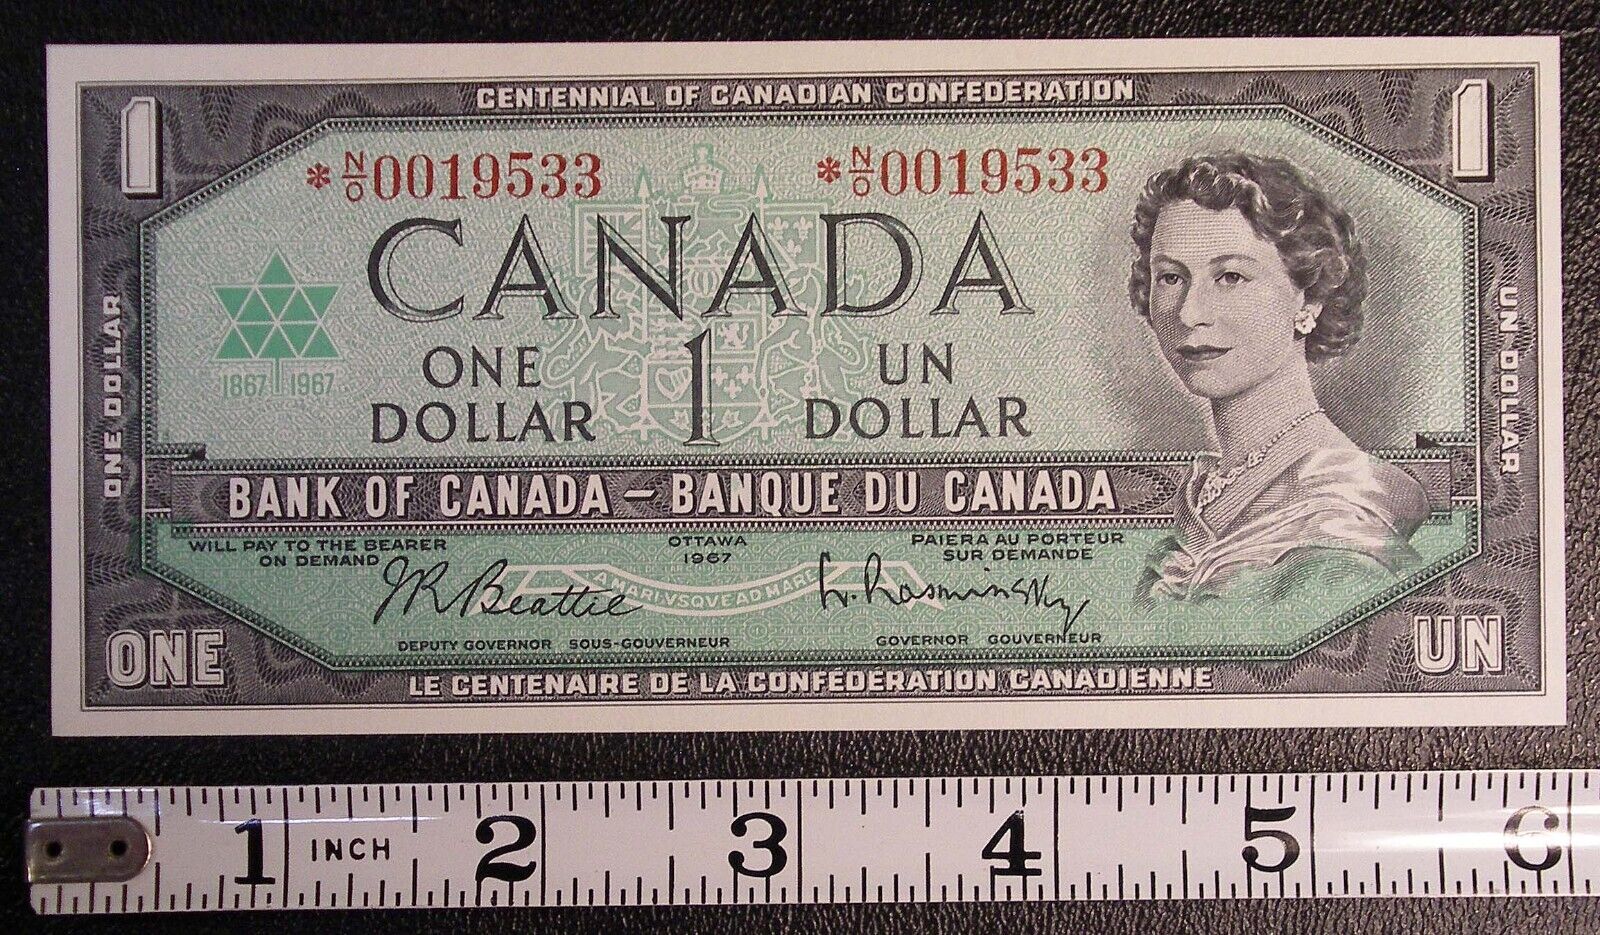 1967 Bank of CANADA $1 banknote P-84b REPLACEMENT NOTE #2274